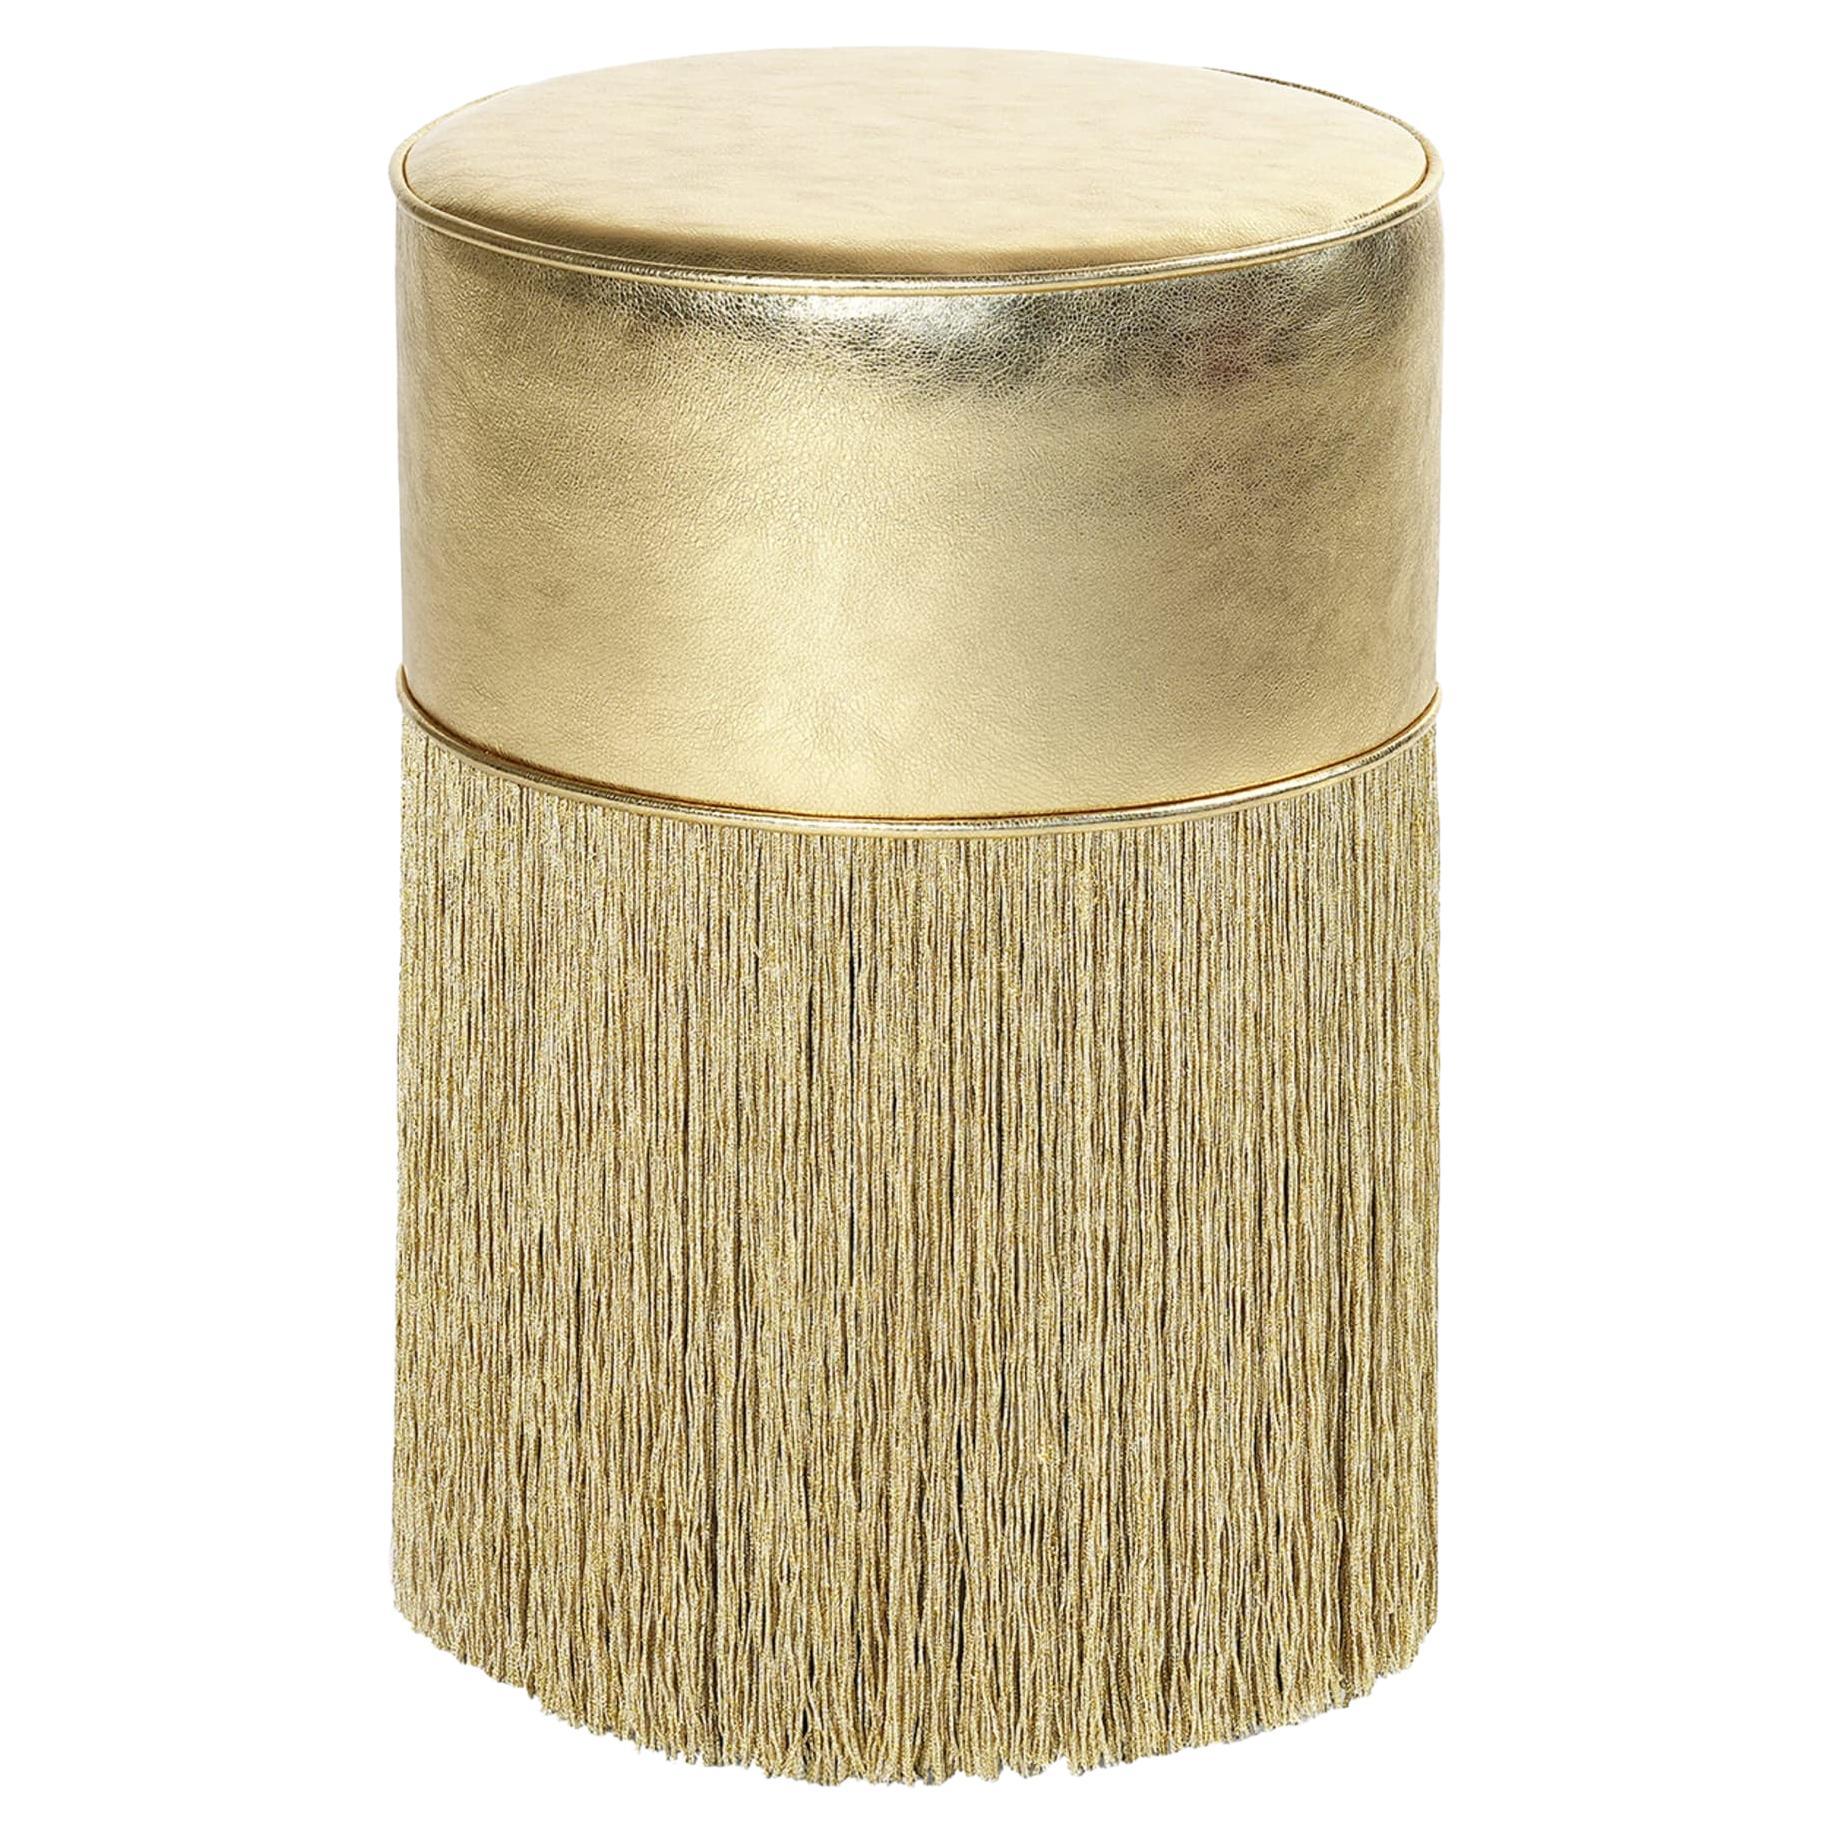 Gleaming Gold Metallic Leather Pouf by Lorenza Bozzoli For Sale